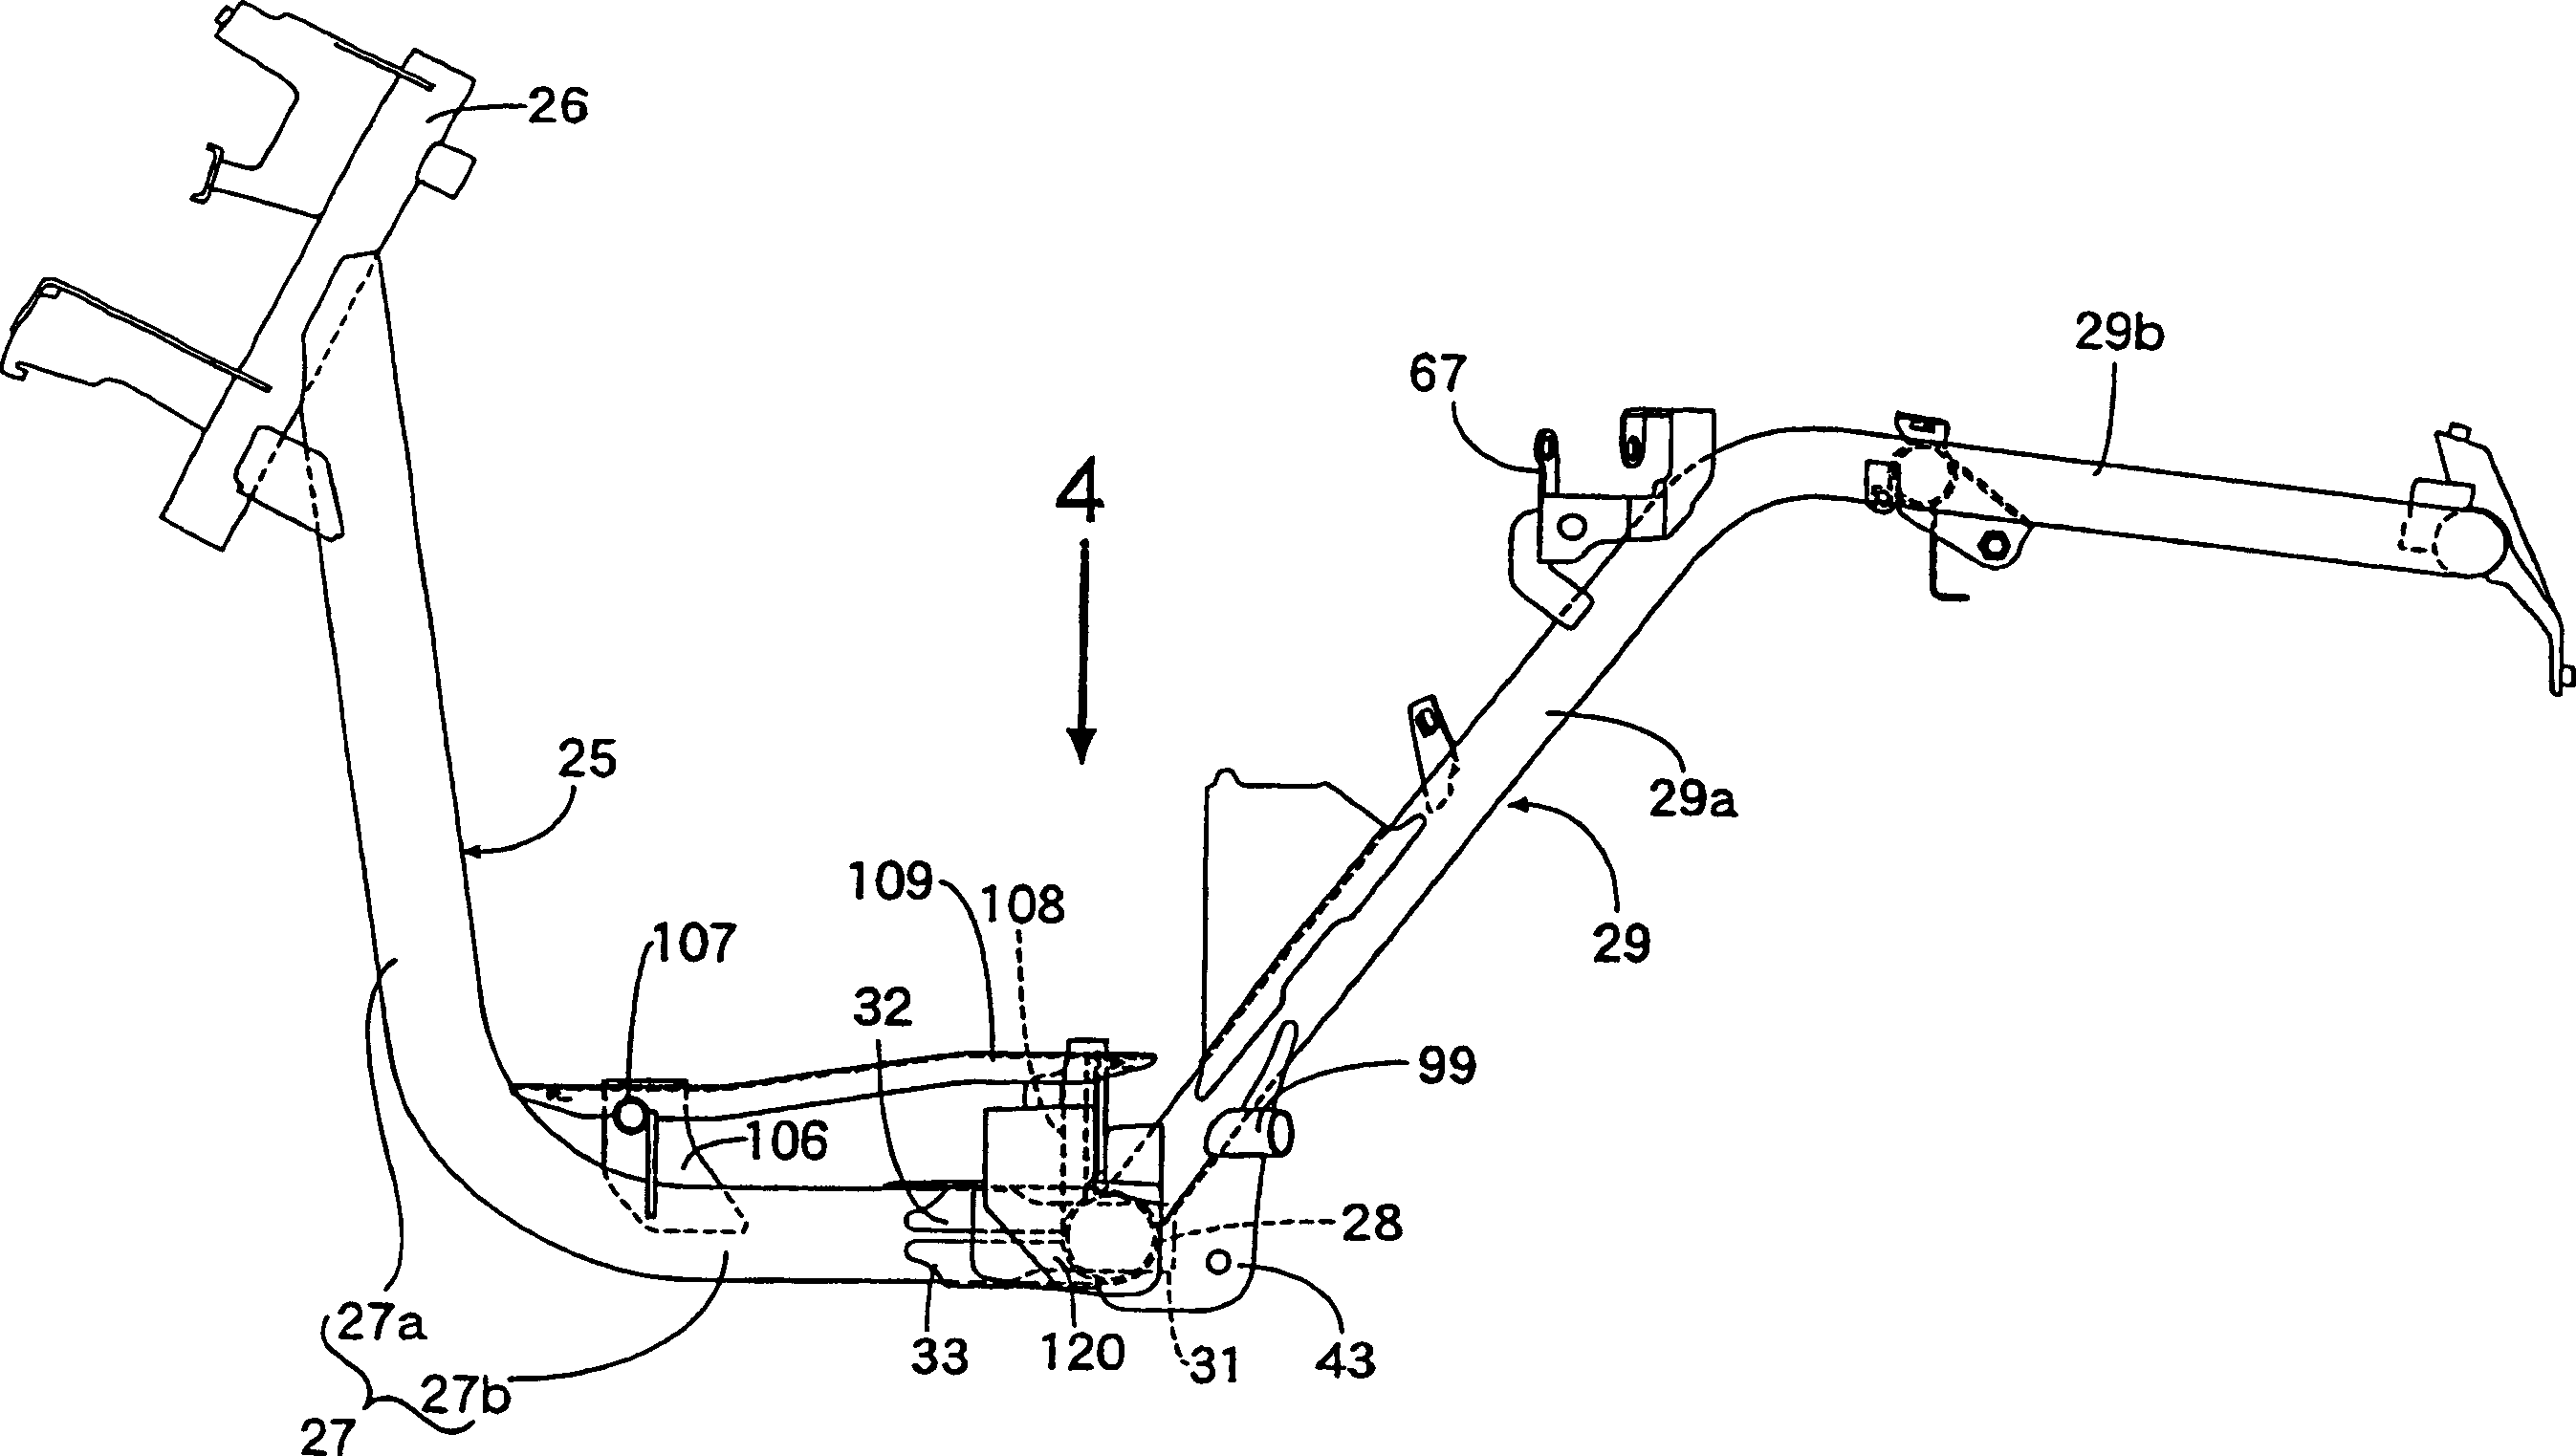 Secondary air supply device for motor-driven two wheeler